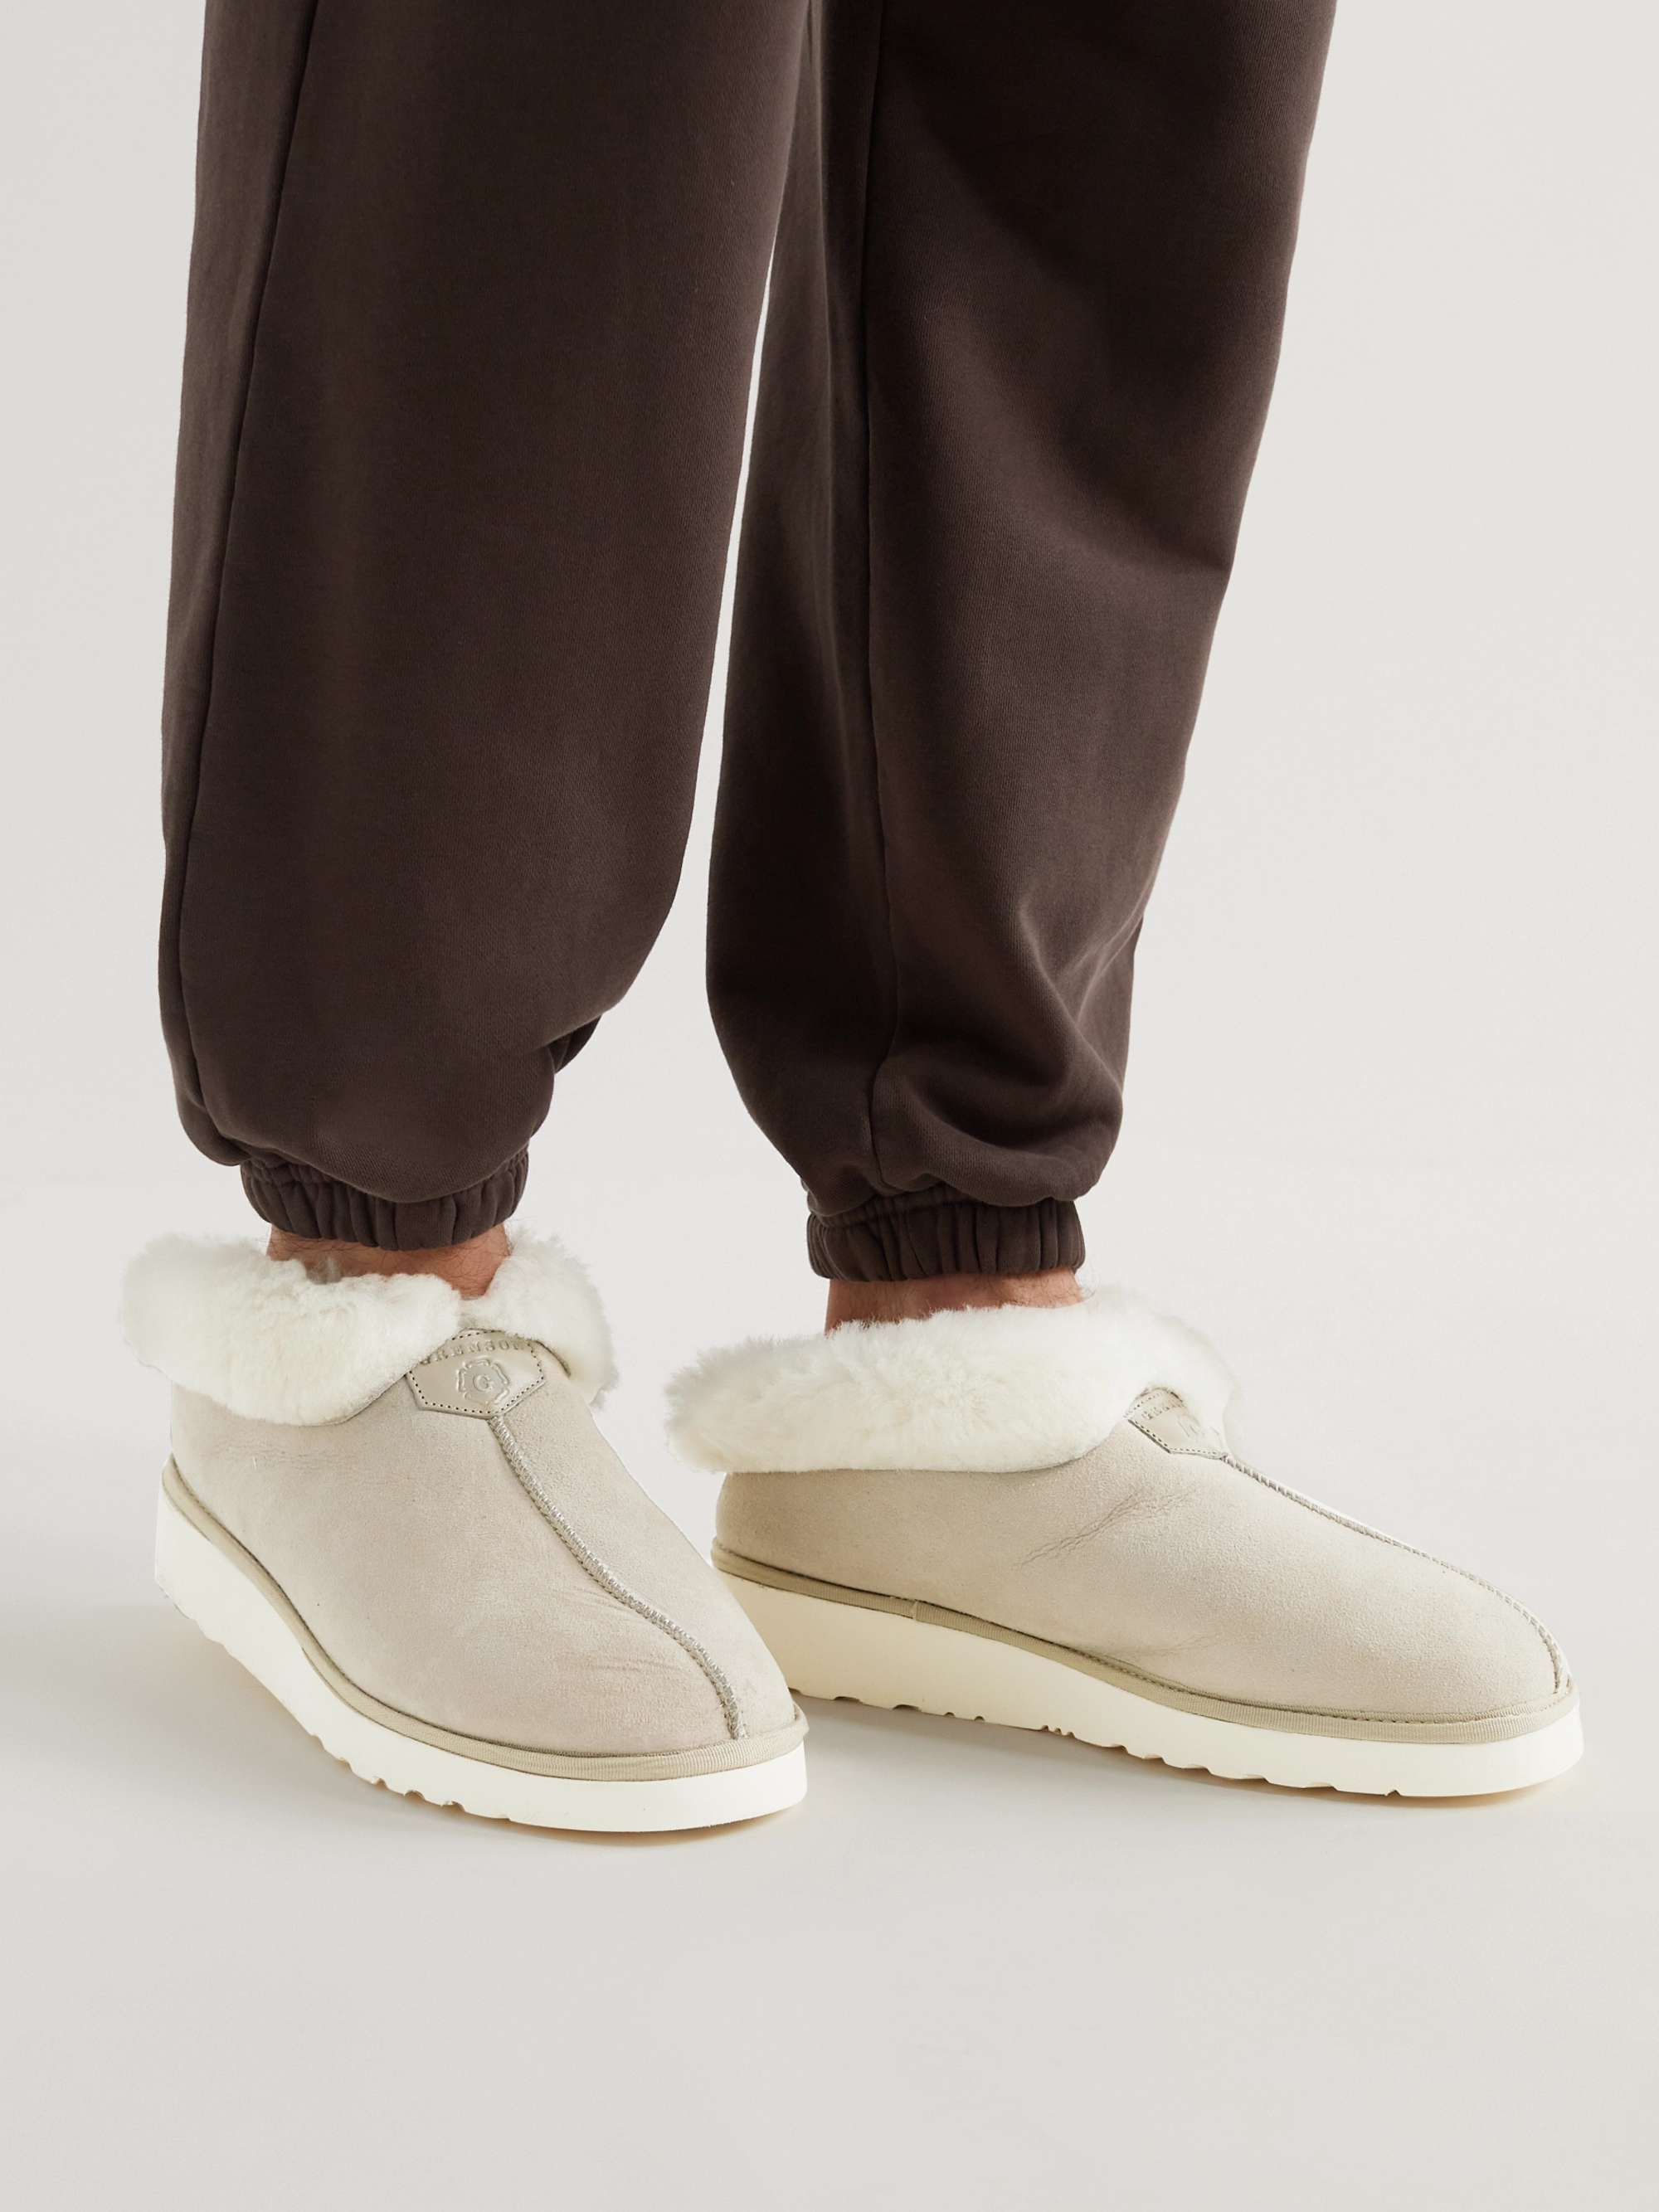 GRENSON Wyeth Shearling-Lined Suede Slippers